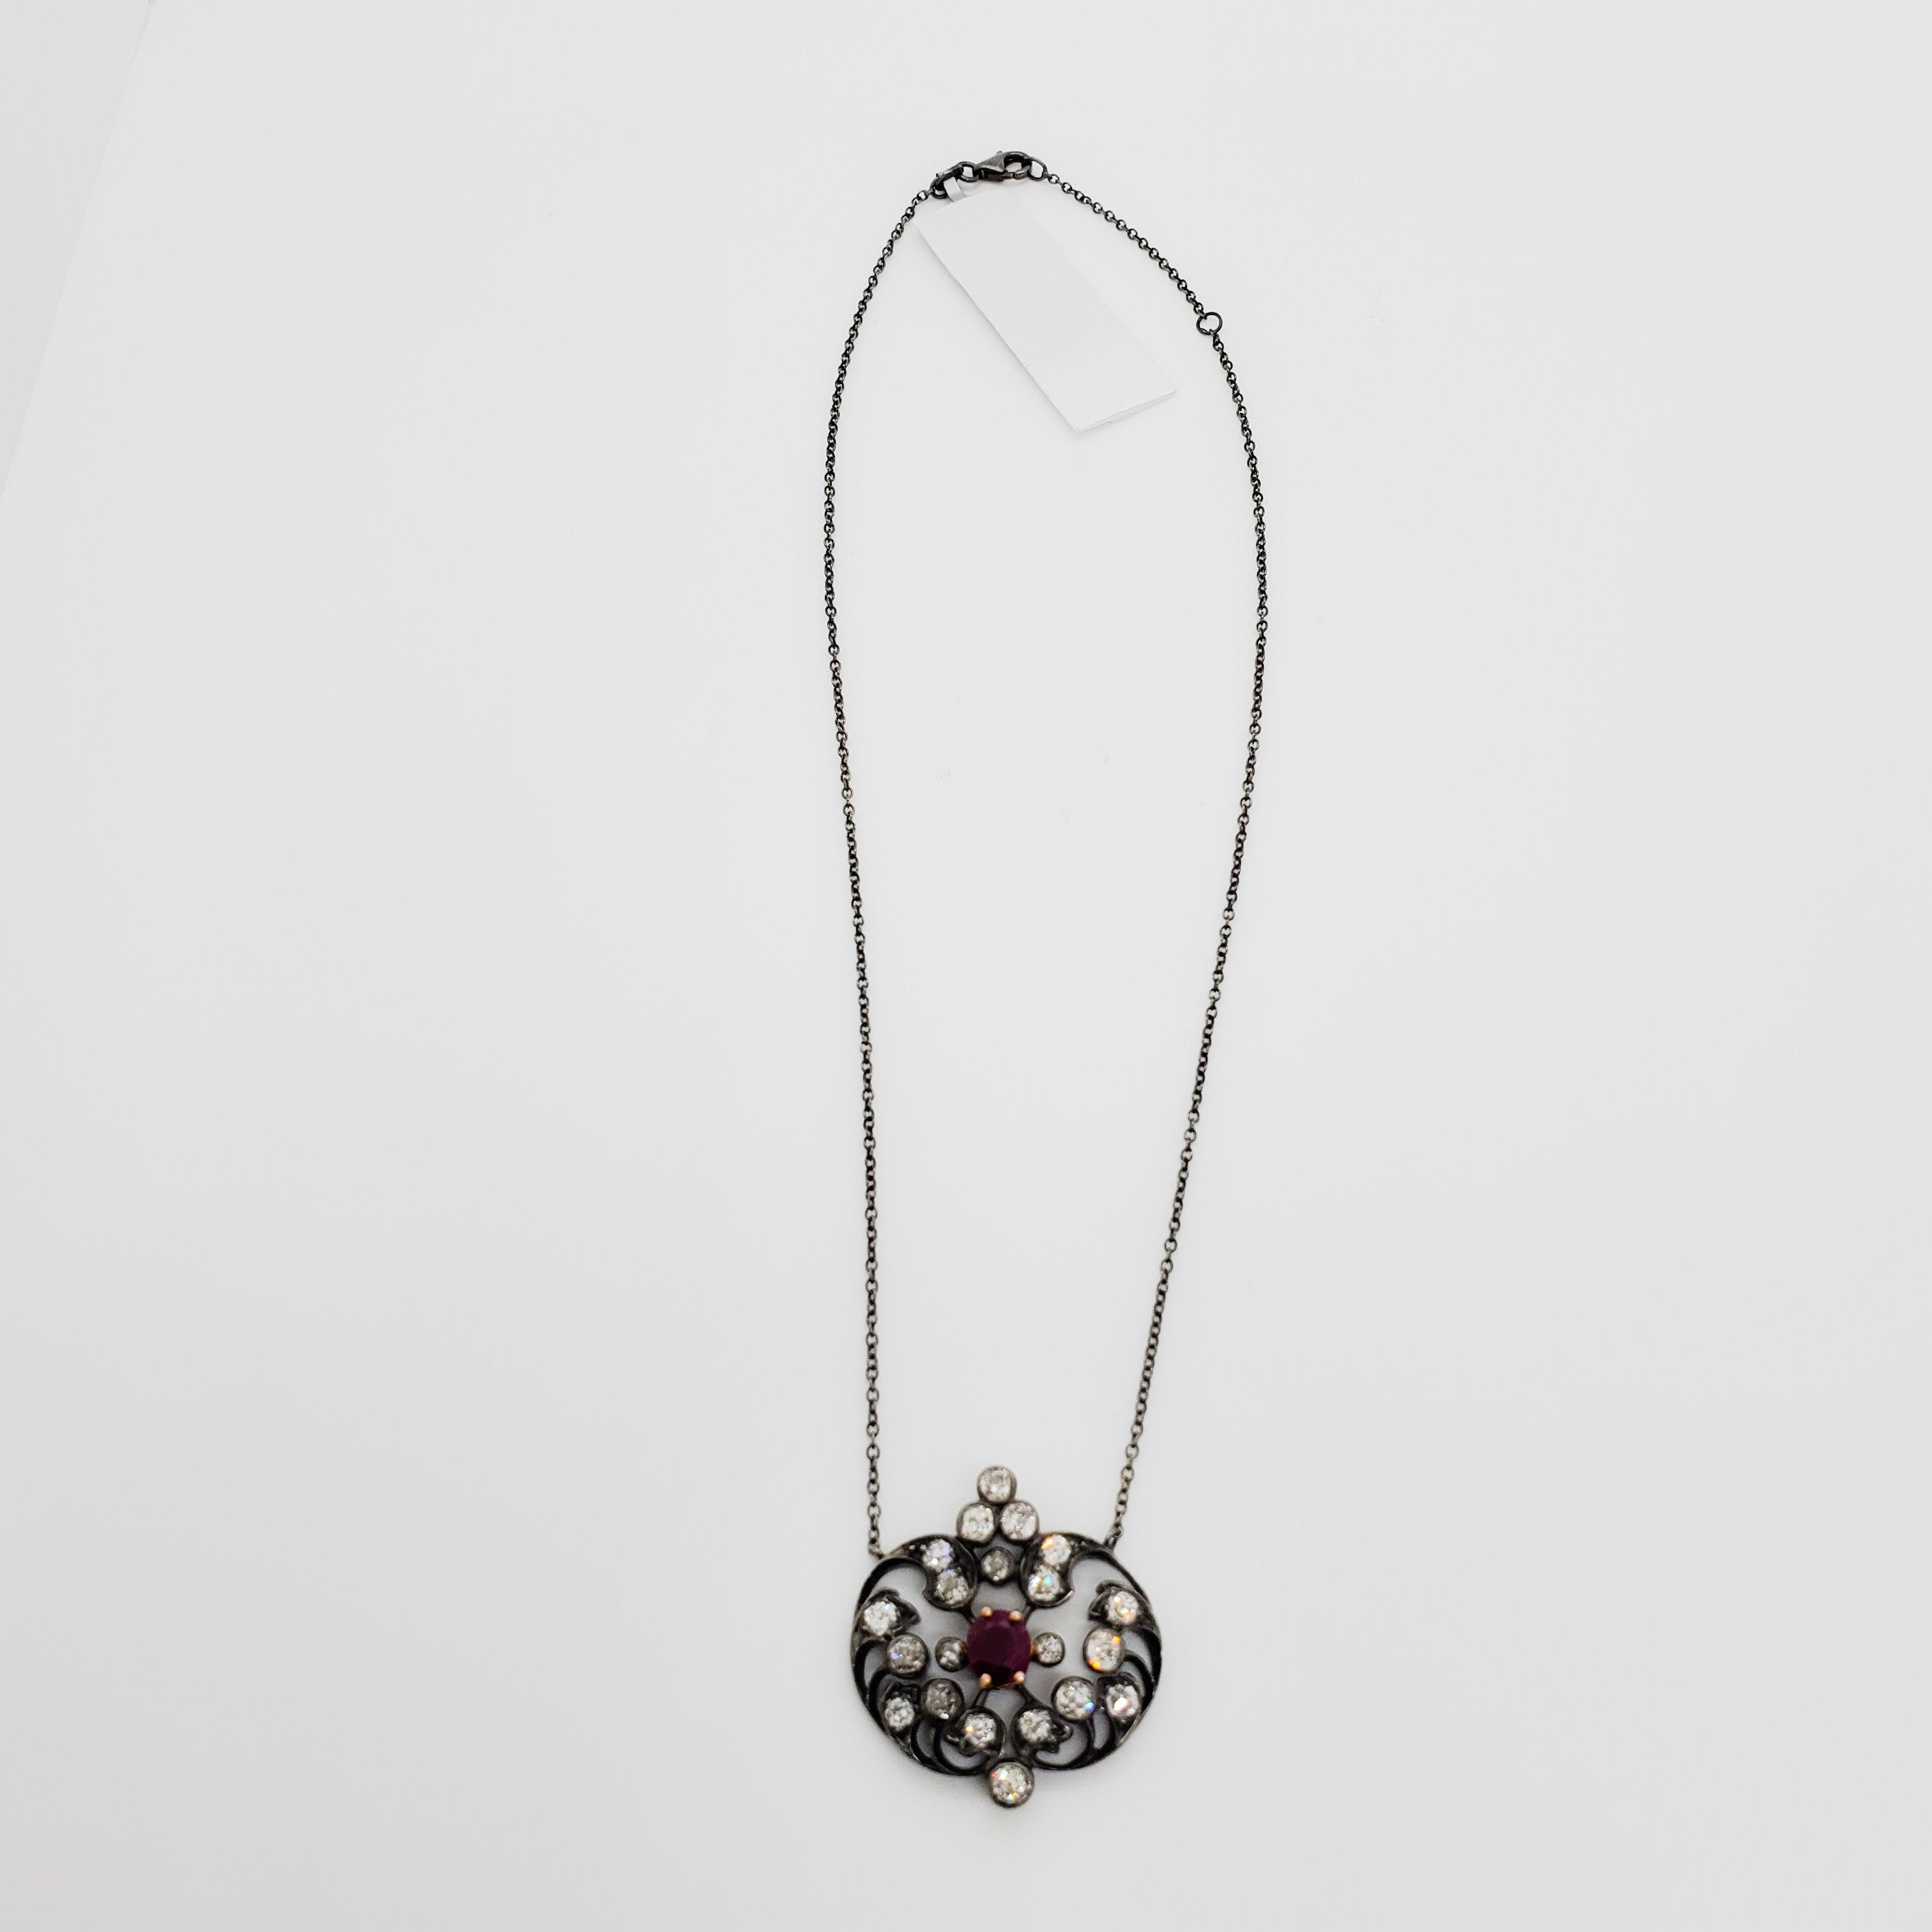 Gorgeous Victorian era necklace featuring a 1.59 ct. Burma ruby oval and 2.00 ct. of good quality white diamond rounds.  Handmade in 18k yellow and white black rhodium gold.